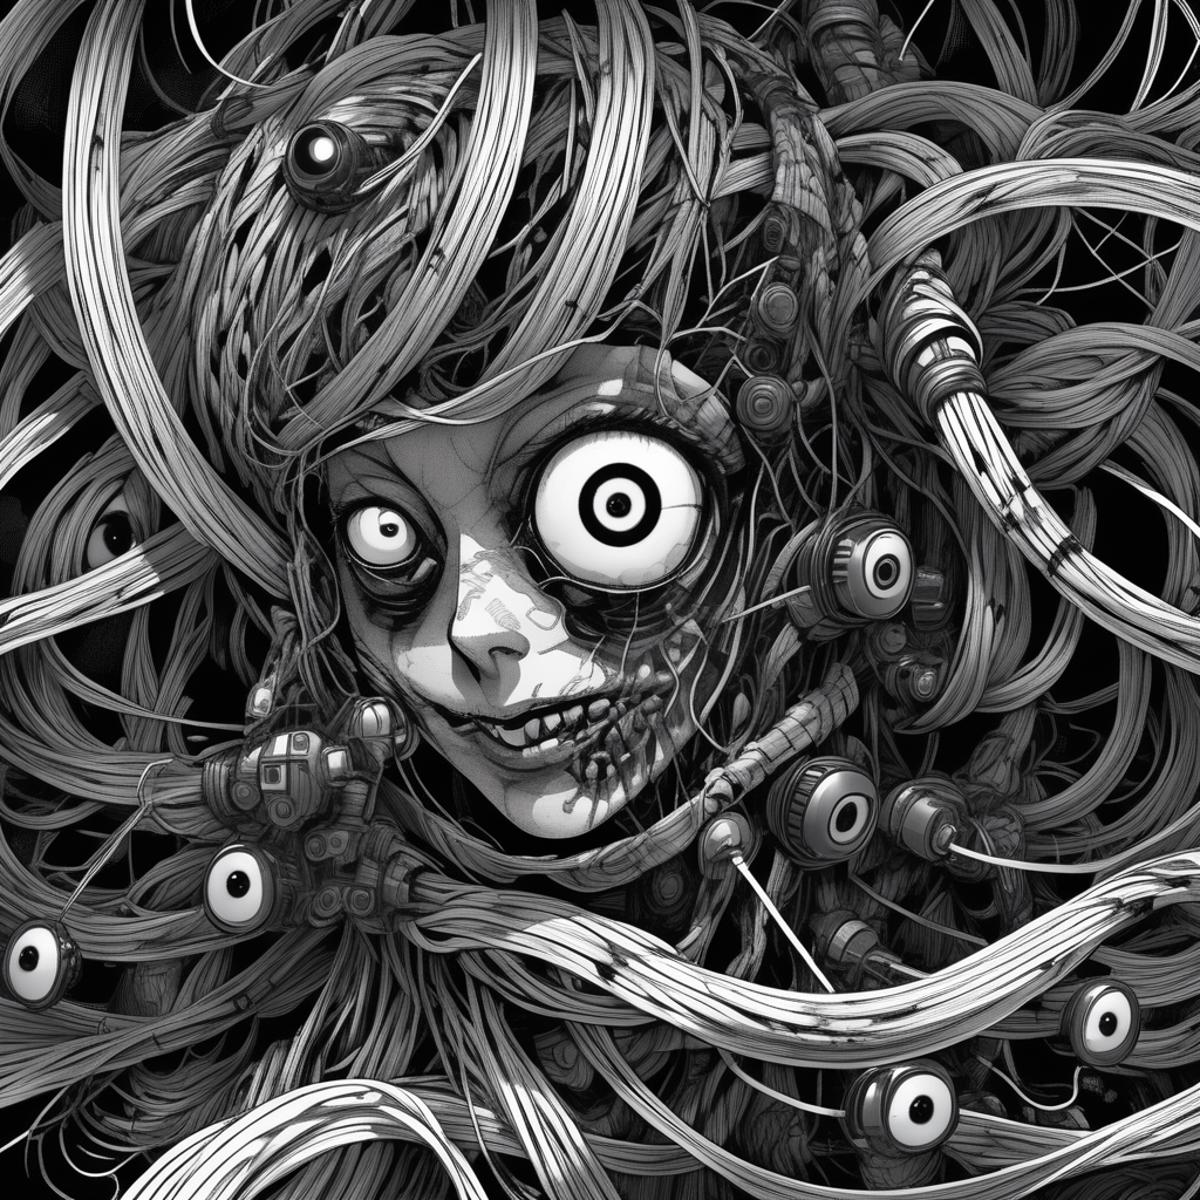 Junji Ito Style {SDXL Now Supported} image by nazzul